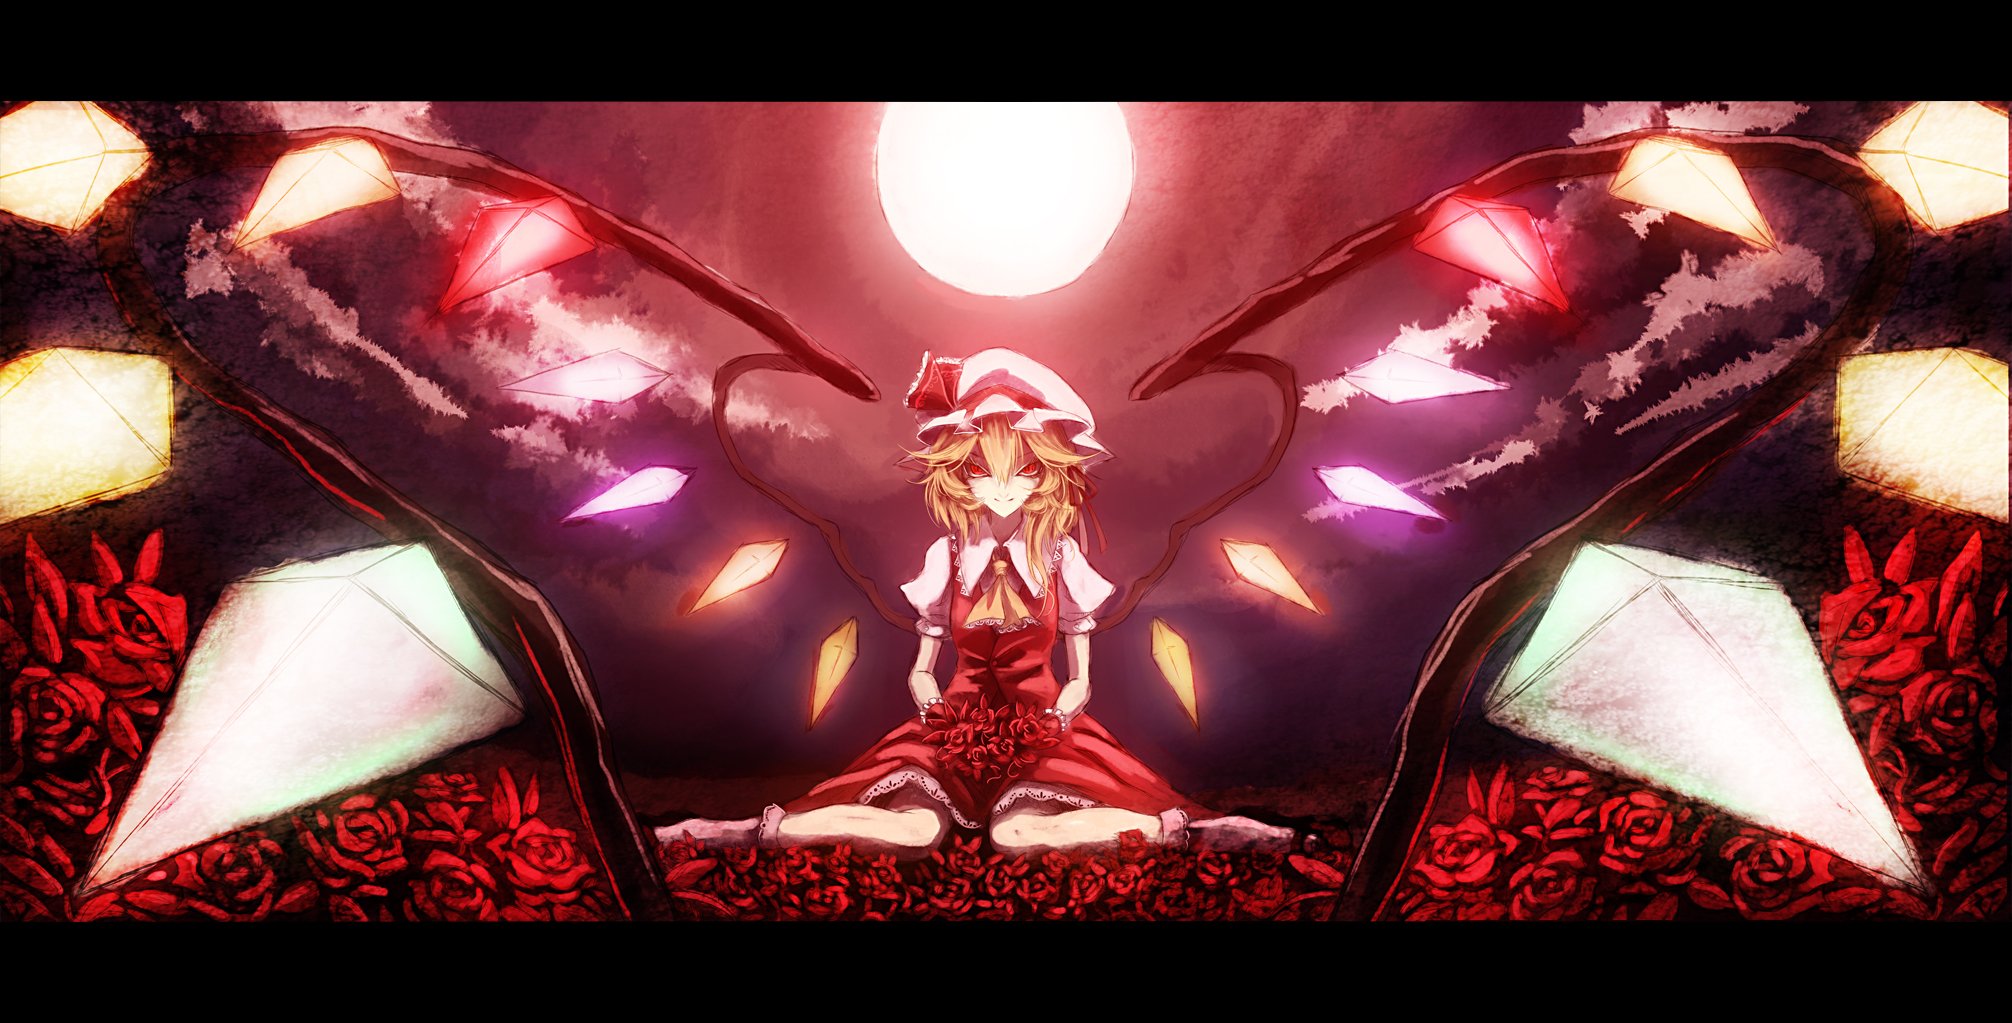 blondes, Video, Games, Clouds, Touhou, Wings, Red, Dress, Flowers, Moon, Long, Hair, Ribbons, Outdoors, Socks, Vampires, Glowing, Red, Eyes, Crystals, Red, Dress, Sitting, Flandre, Scarlet, Soft, Shading, Roses, Wallpaper